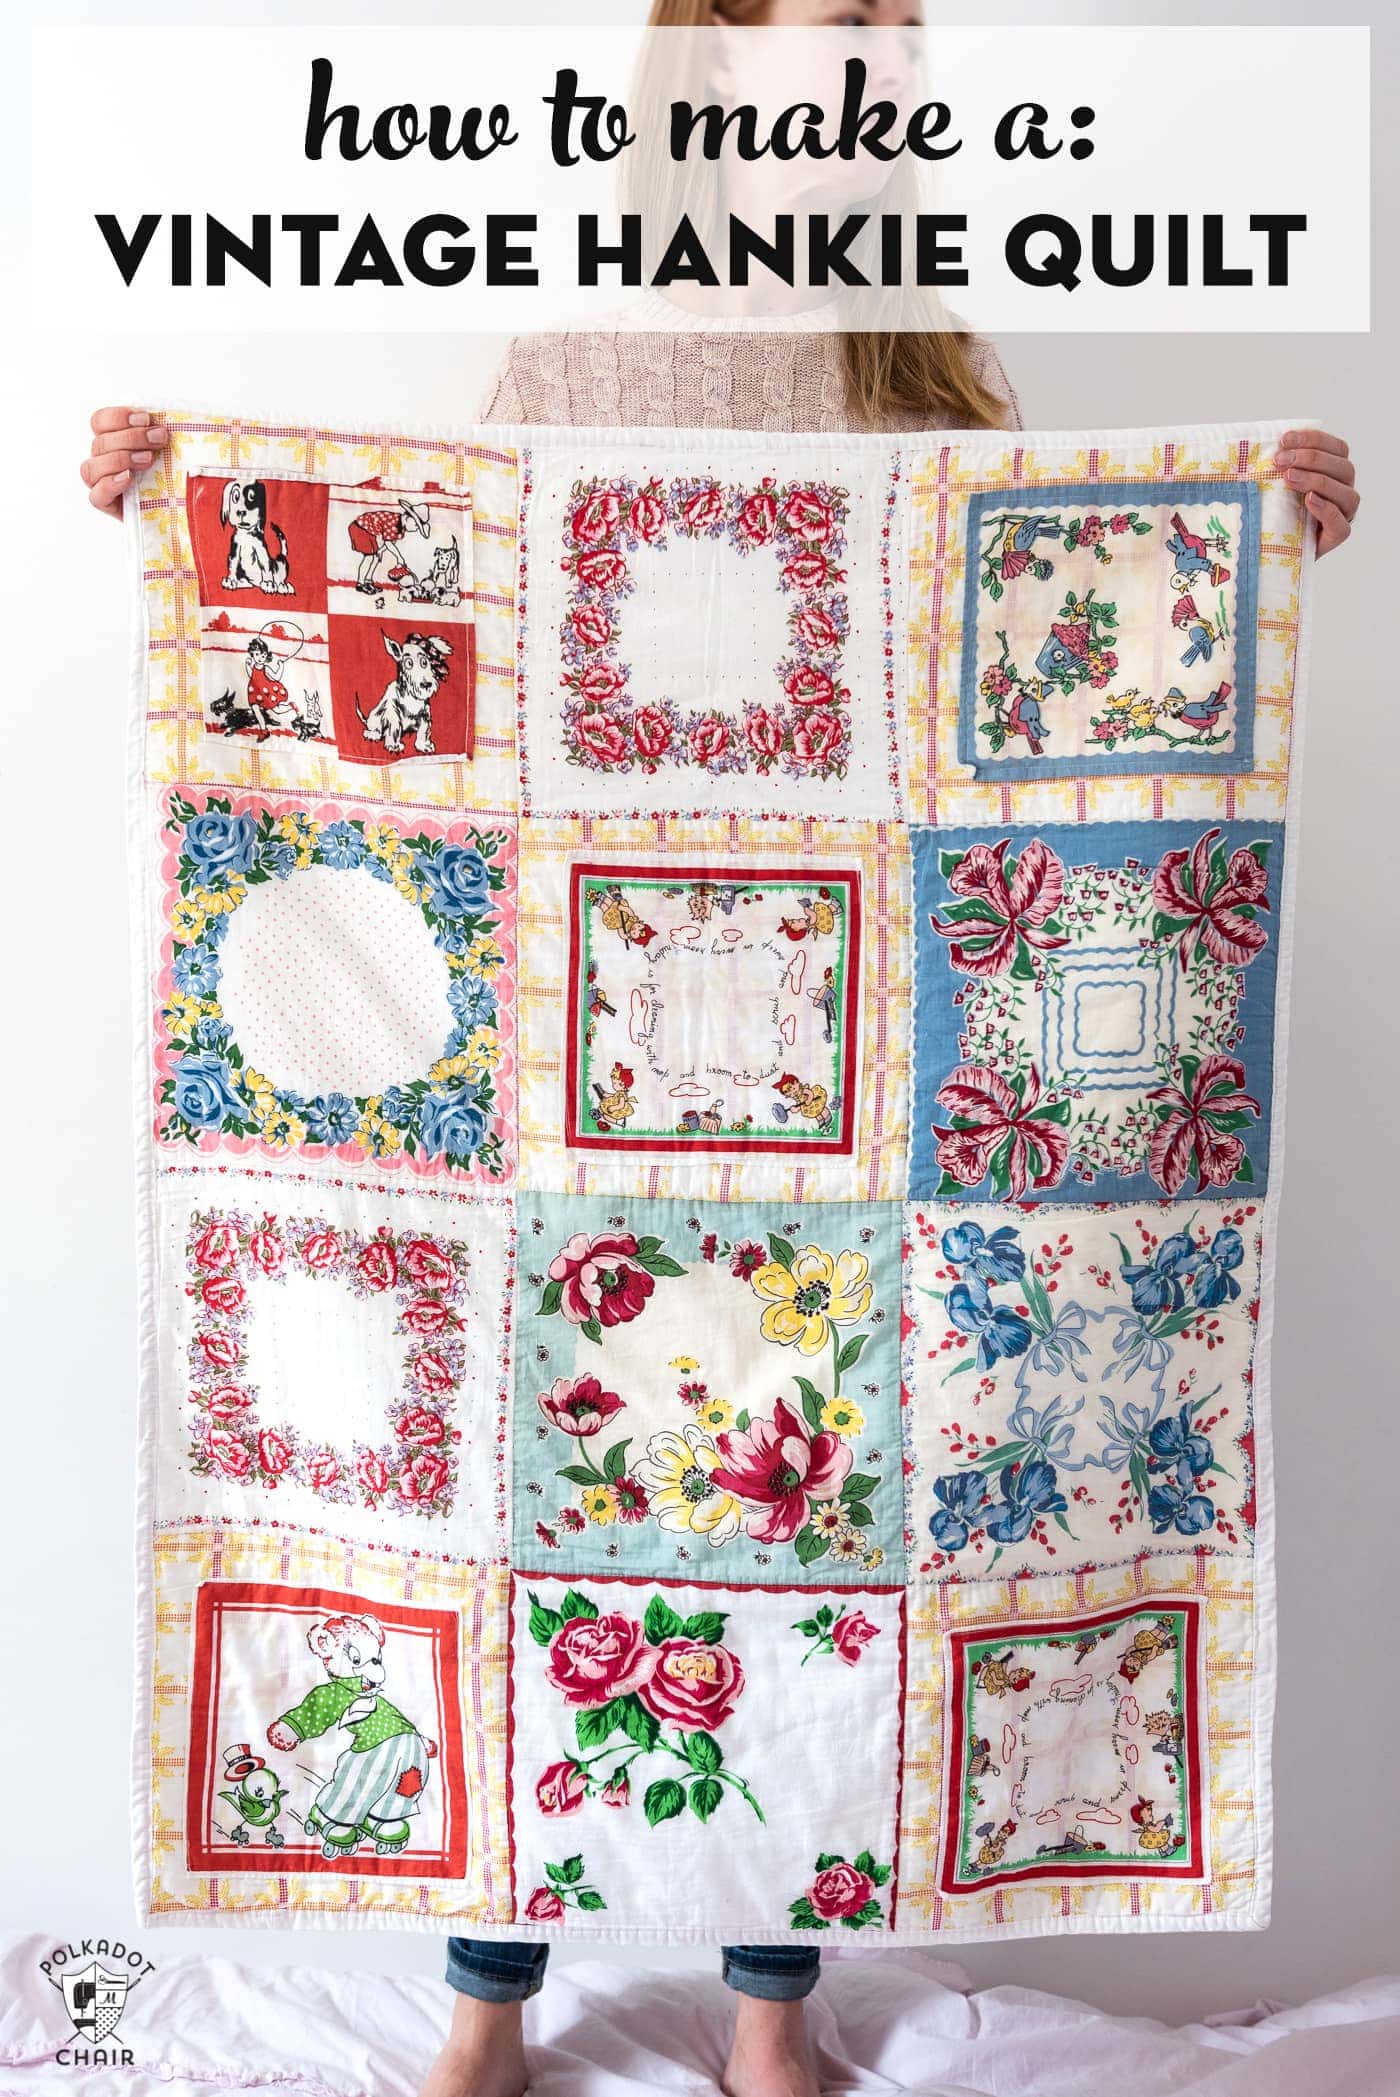 How to Make a Vintage Hankie Quilt